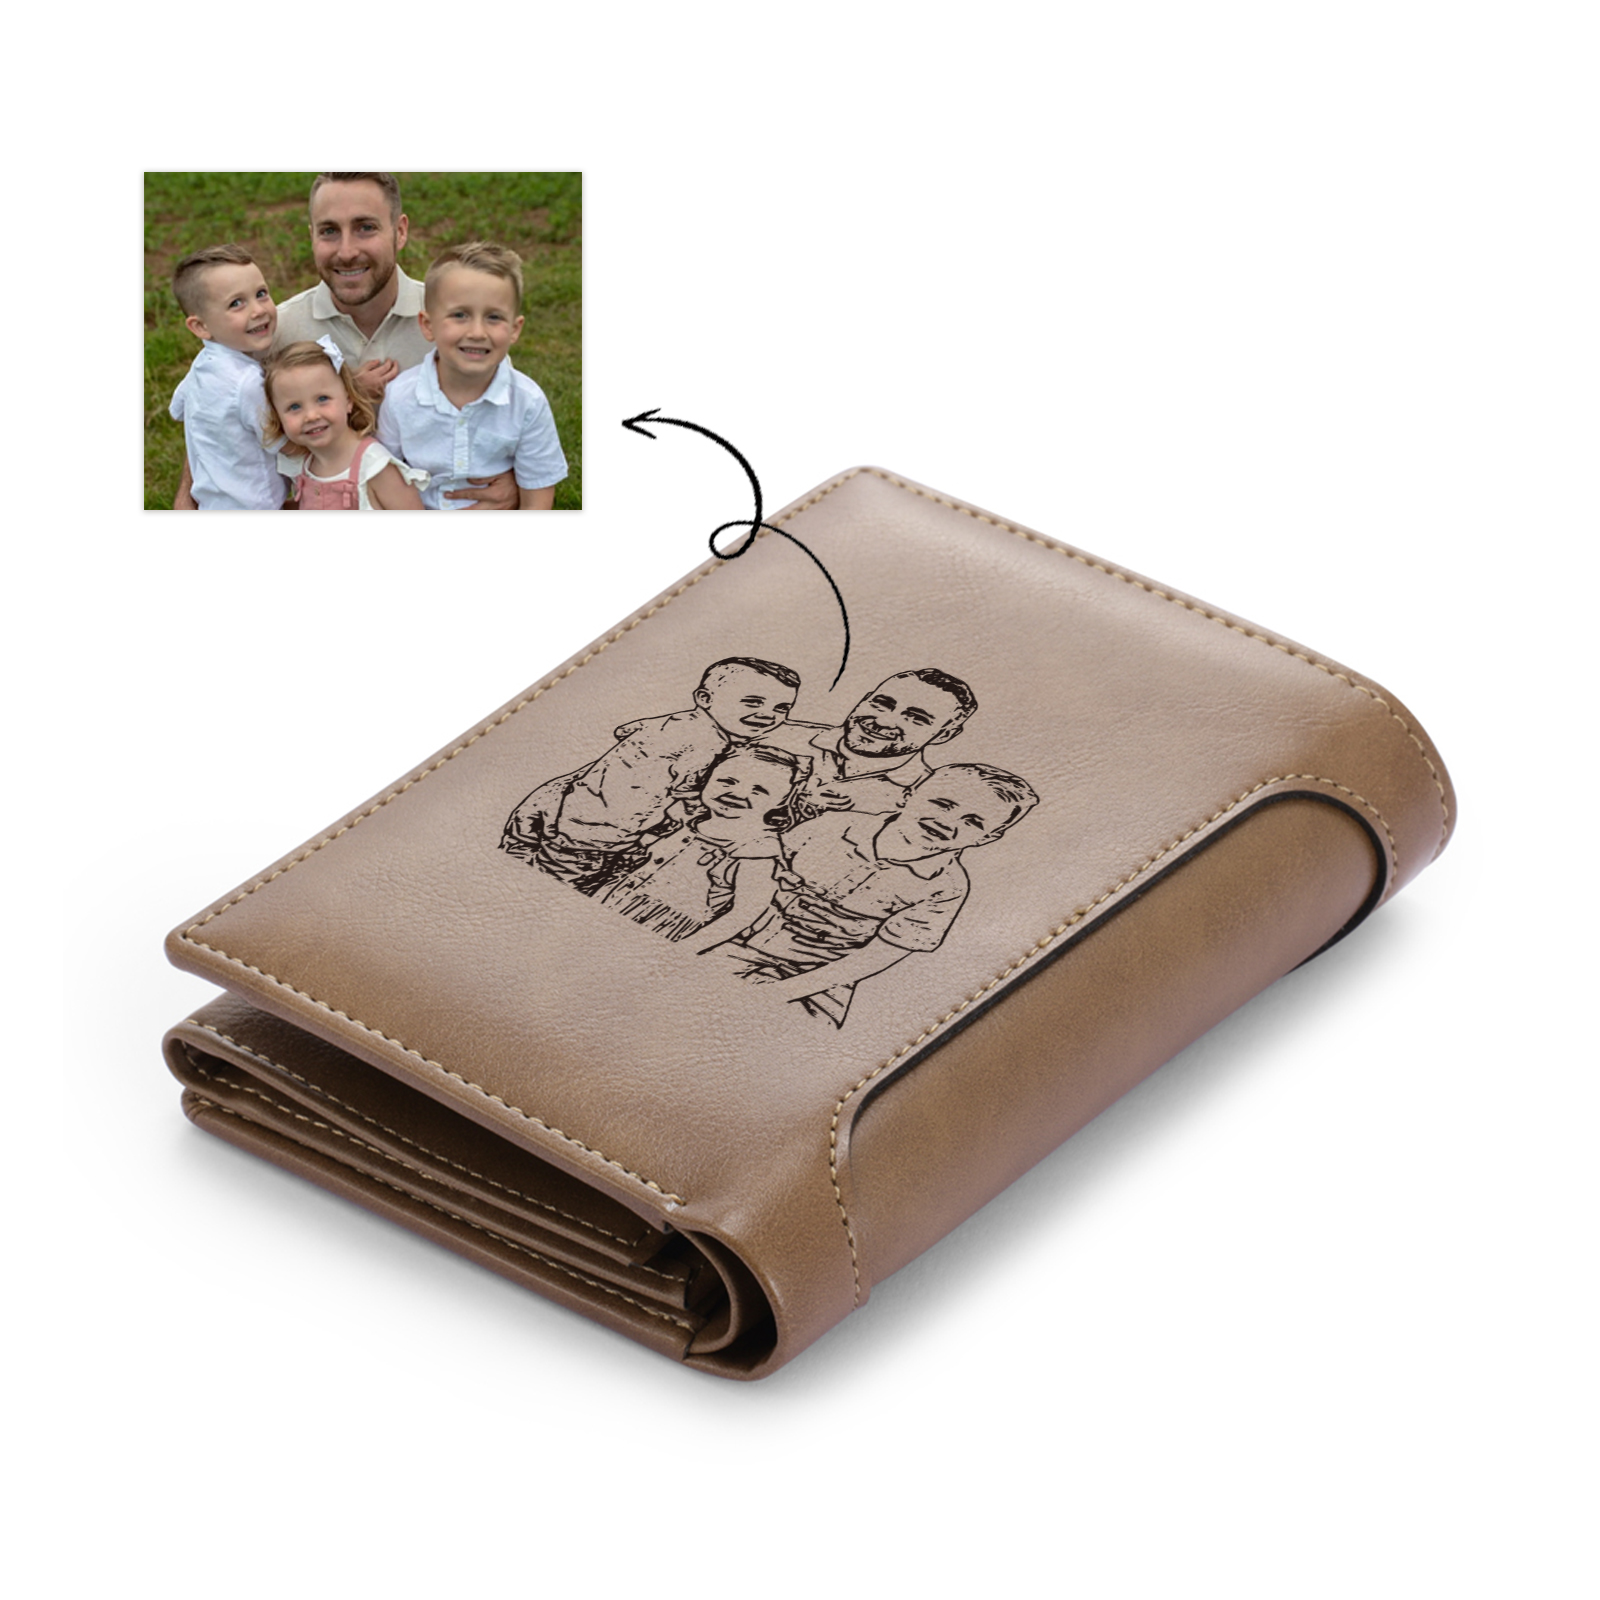 3 Names-Personalized Doll Customized Leather Men's Wallet Customized Name Folding Brown Wallet for Dad